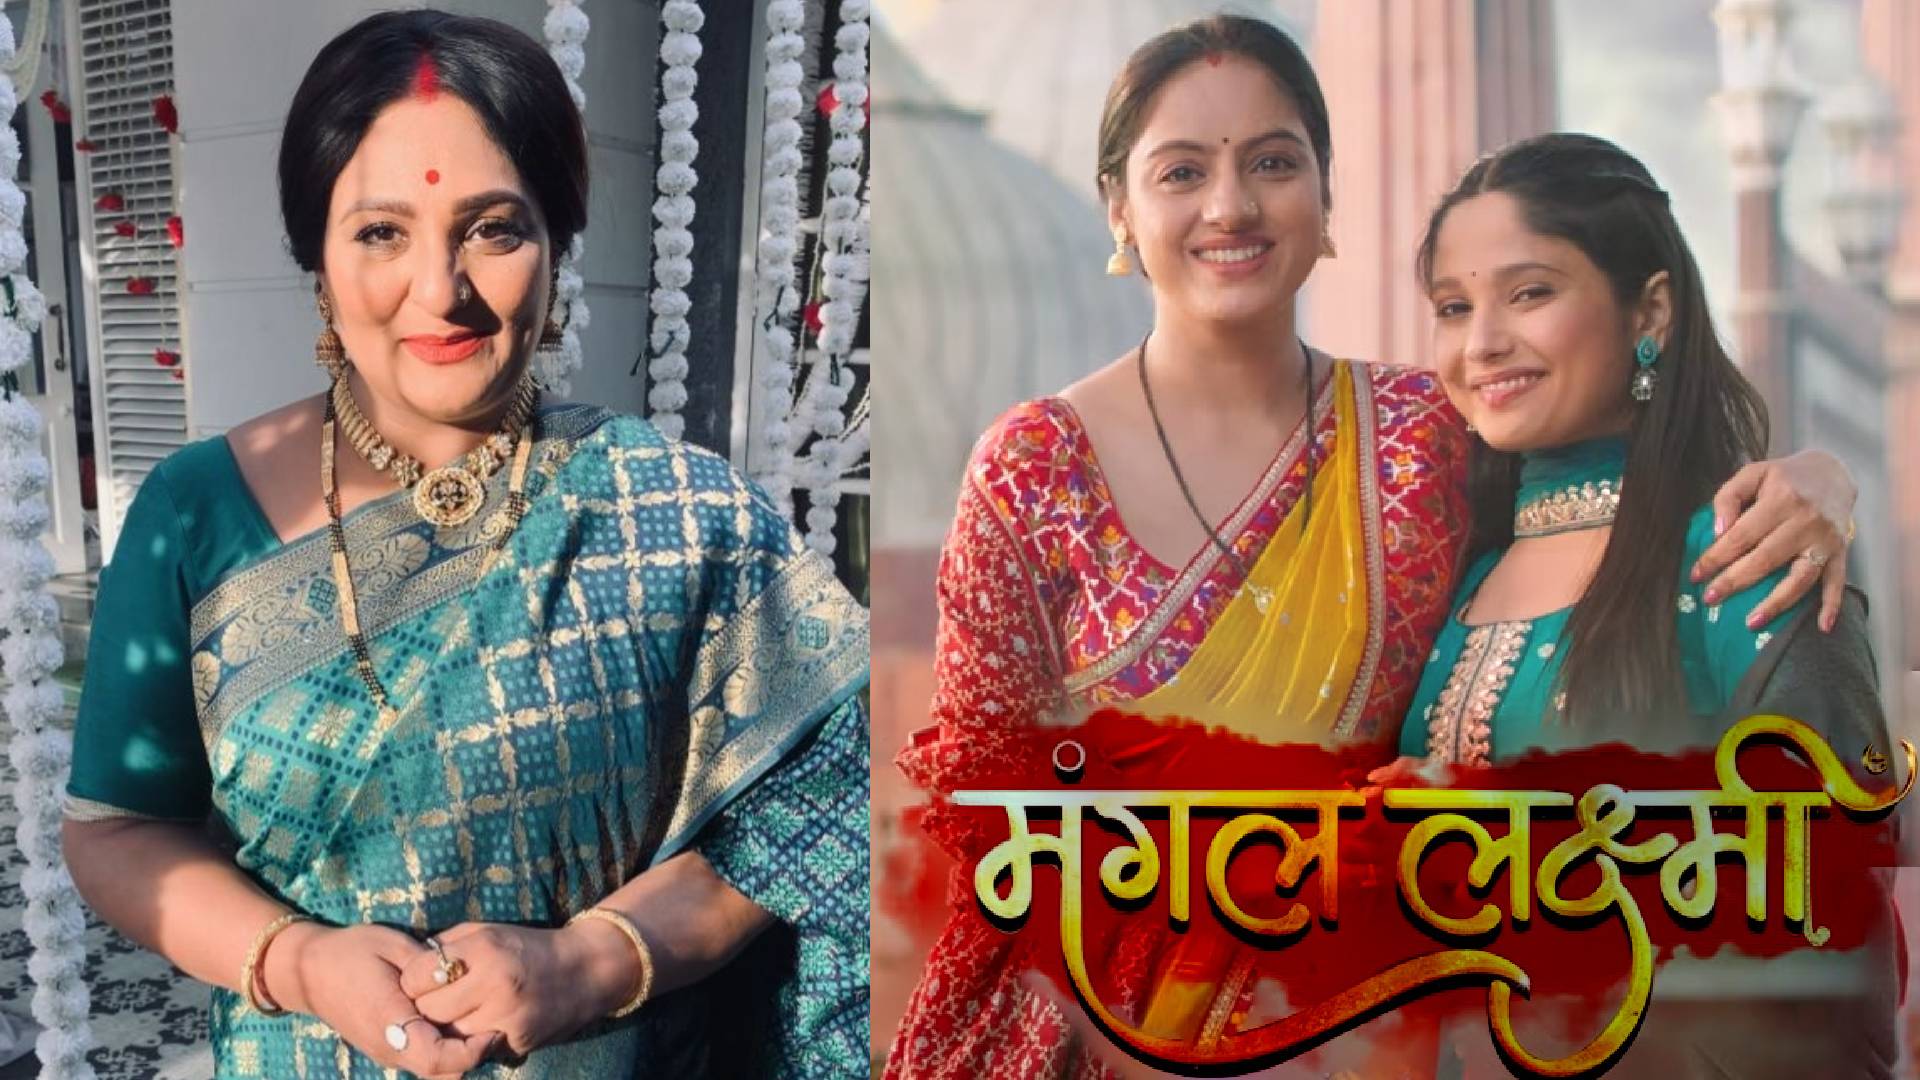 Urvashi Upadhyay’s role as a mother-in-law on COLORS’ ‘Mangal Lakshmi’ defies norms in the television landscape